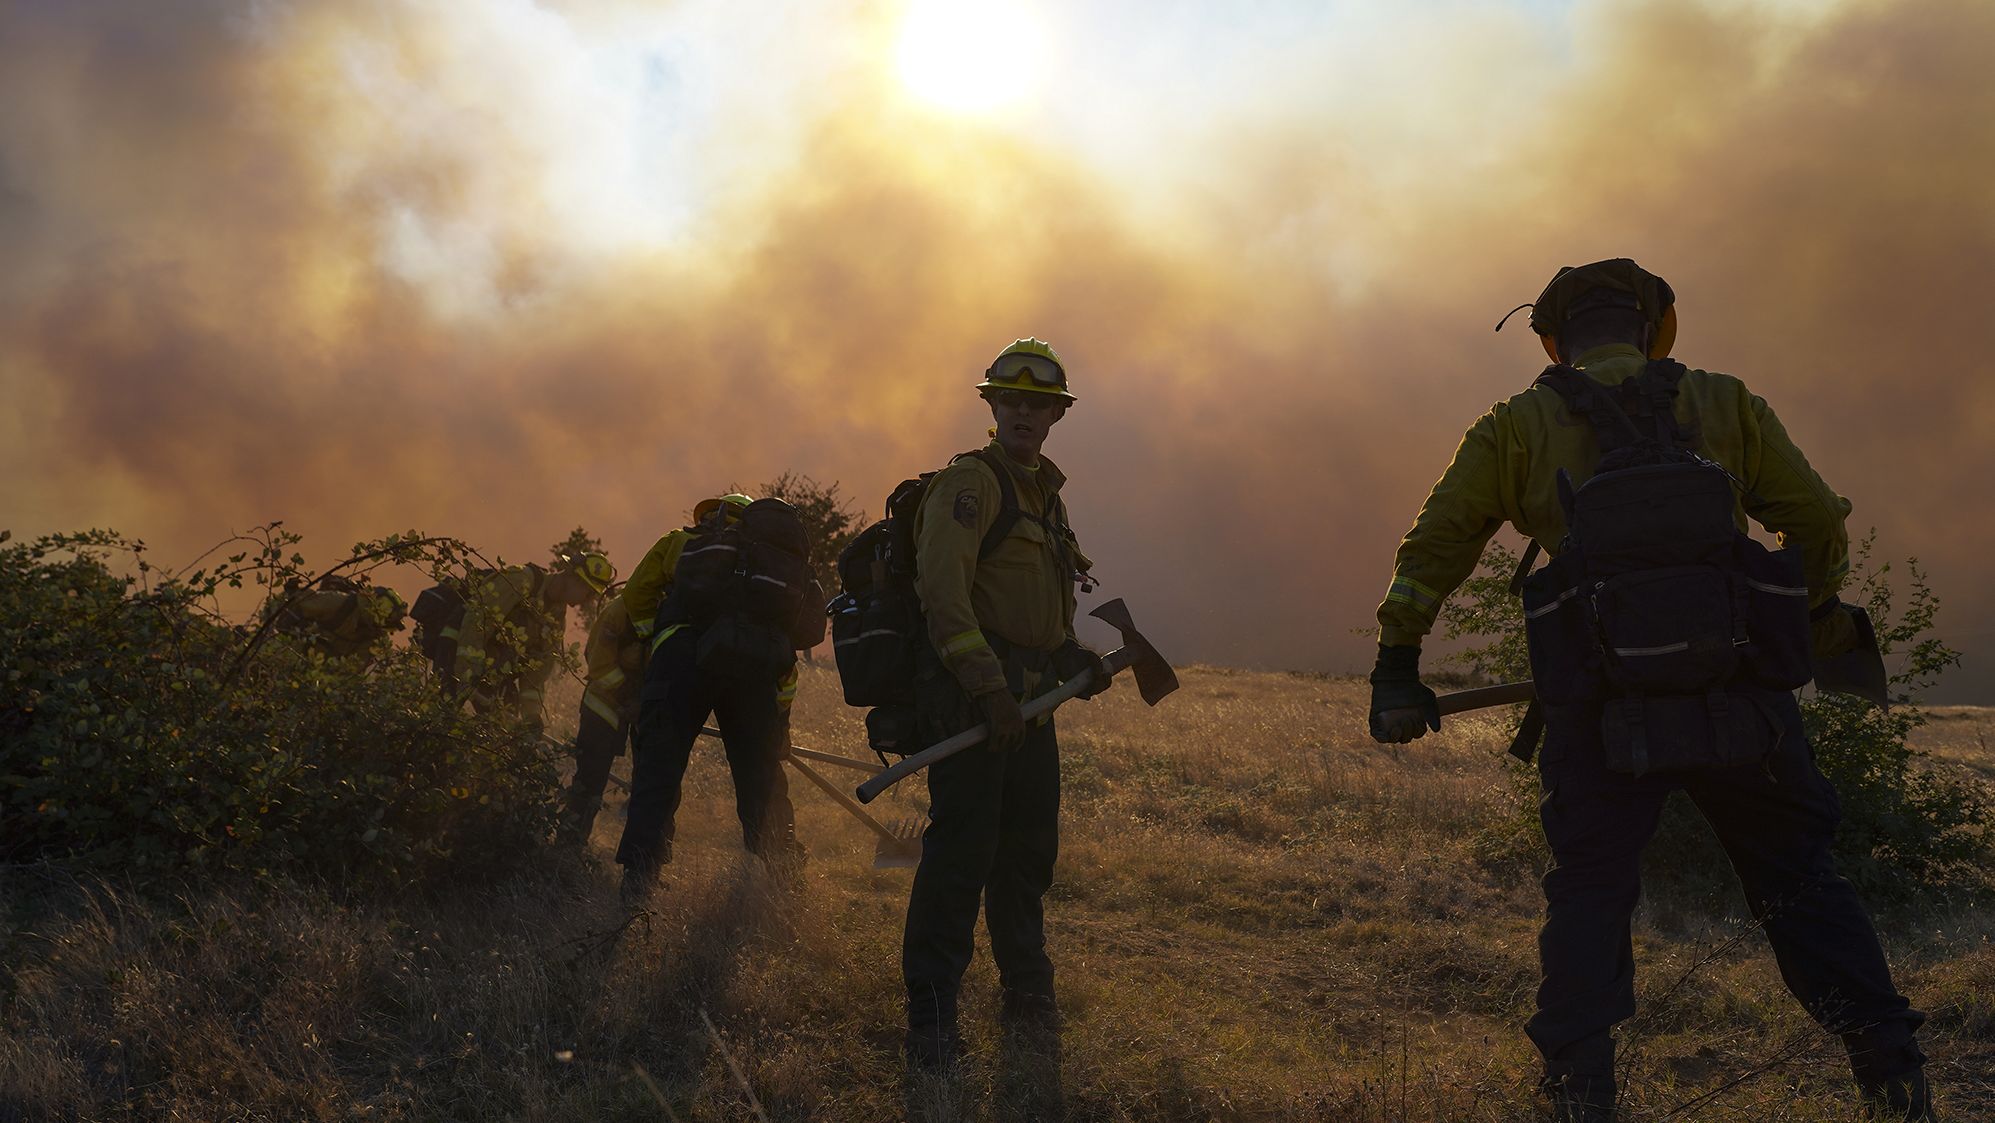 The Zogg Fire has been fully contained more than two weeks after it started.